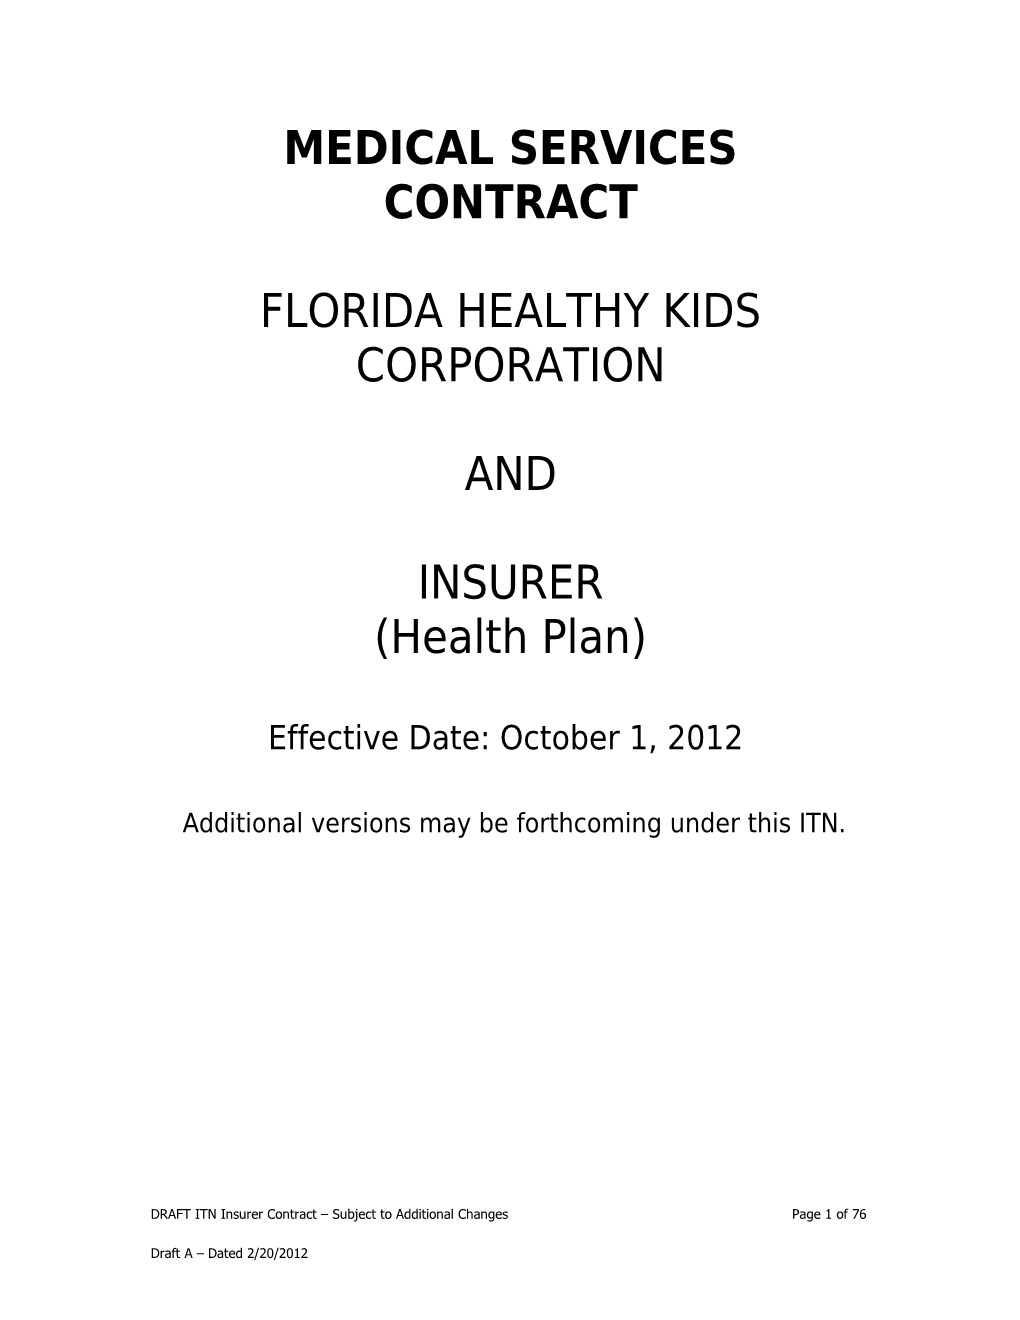 Medical Services Contract